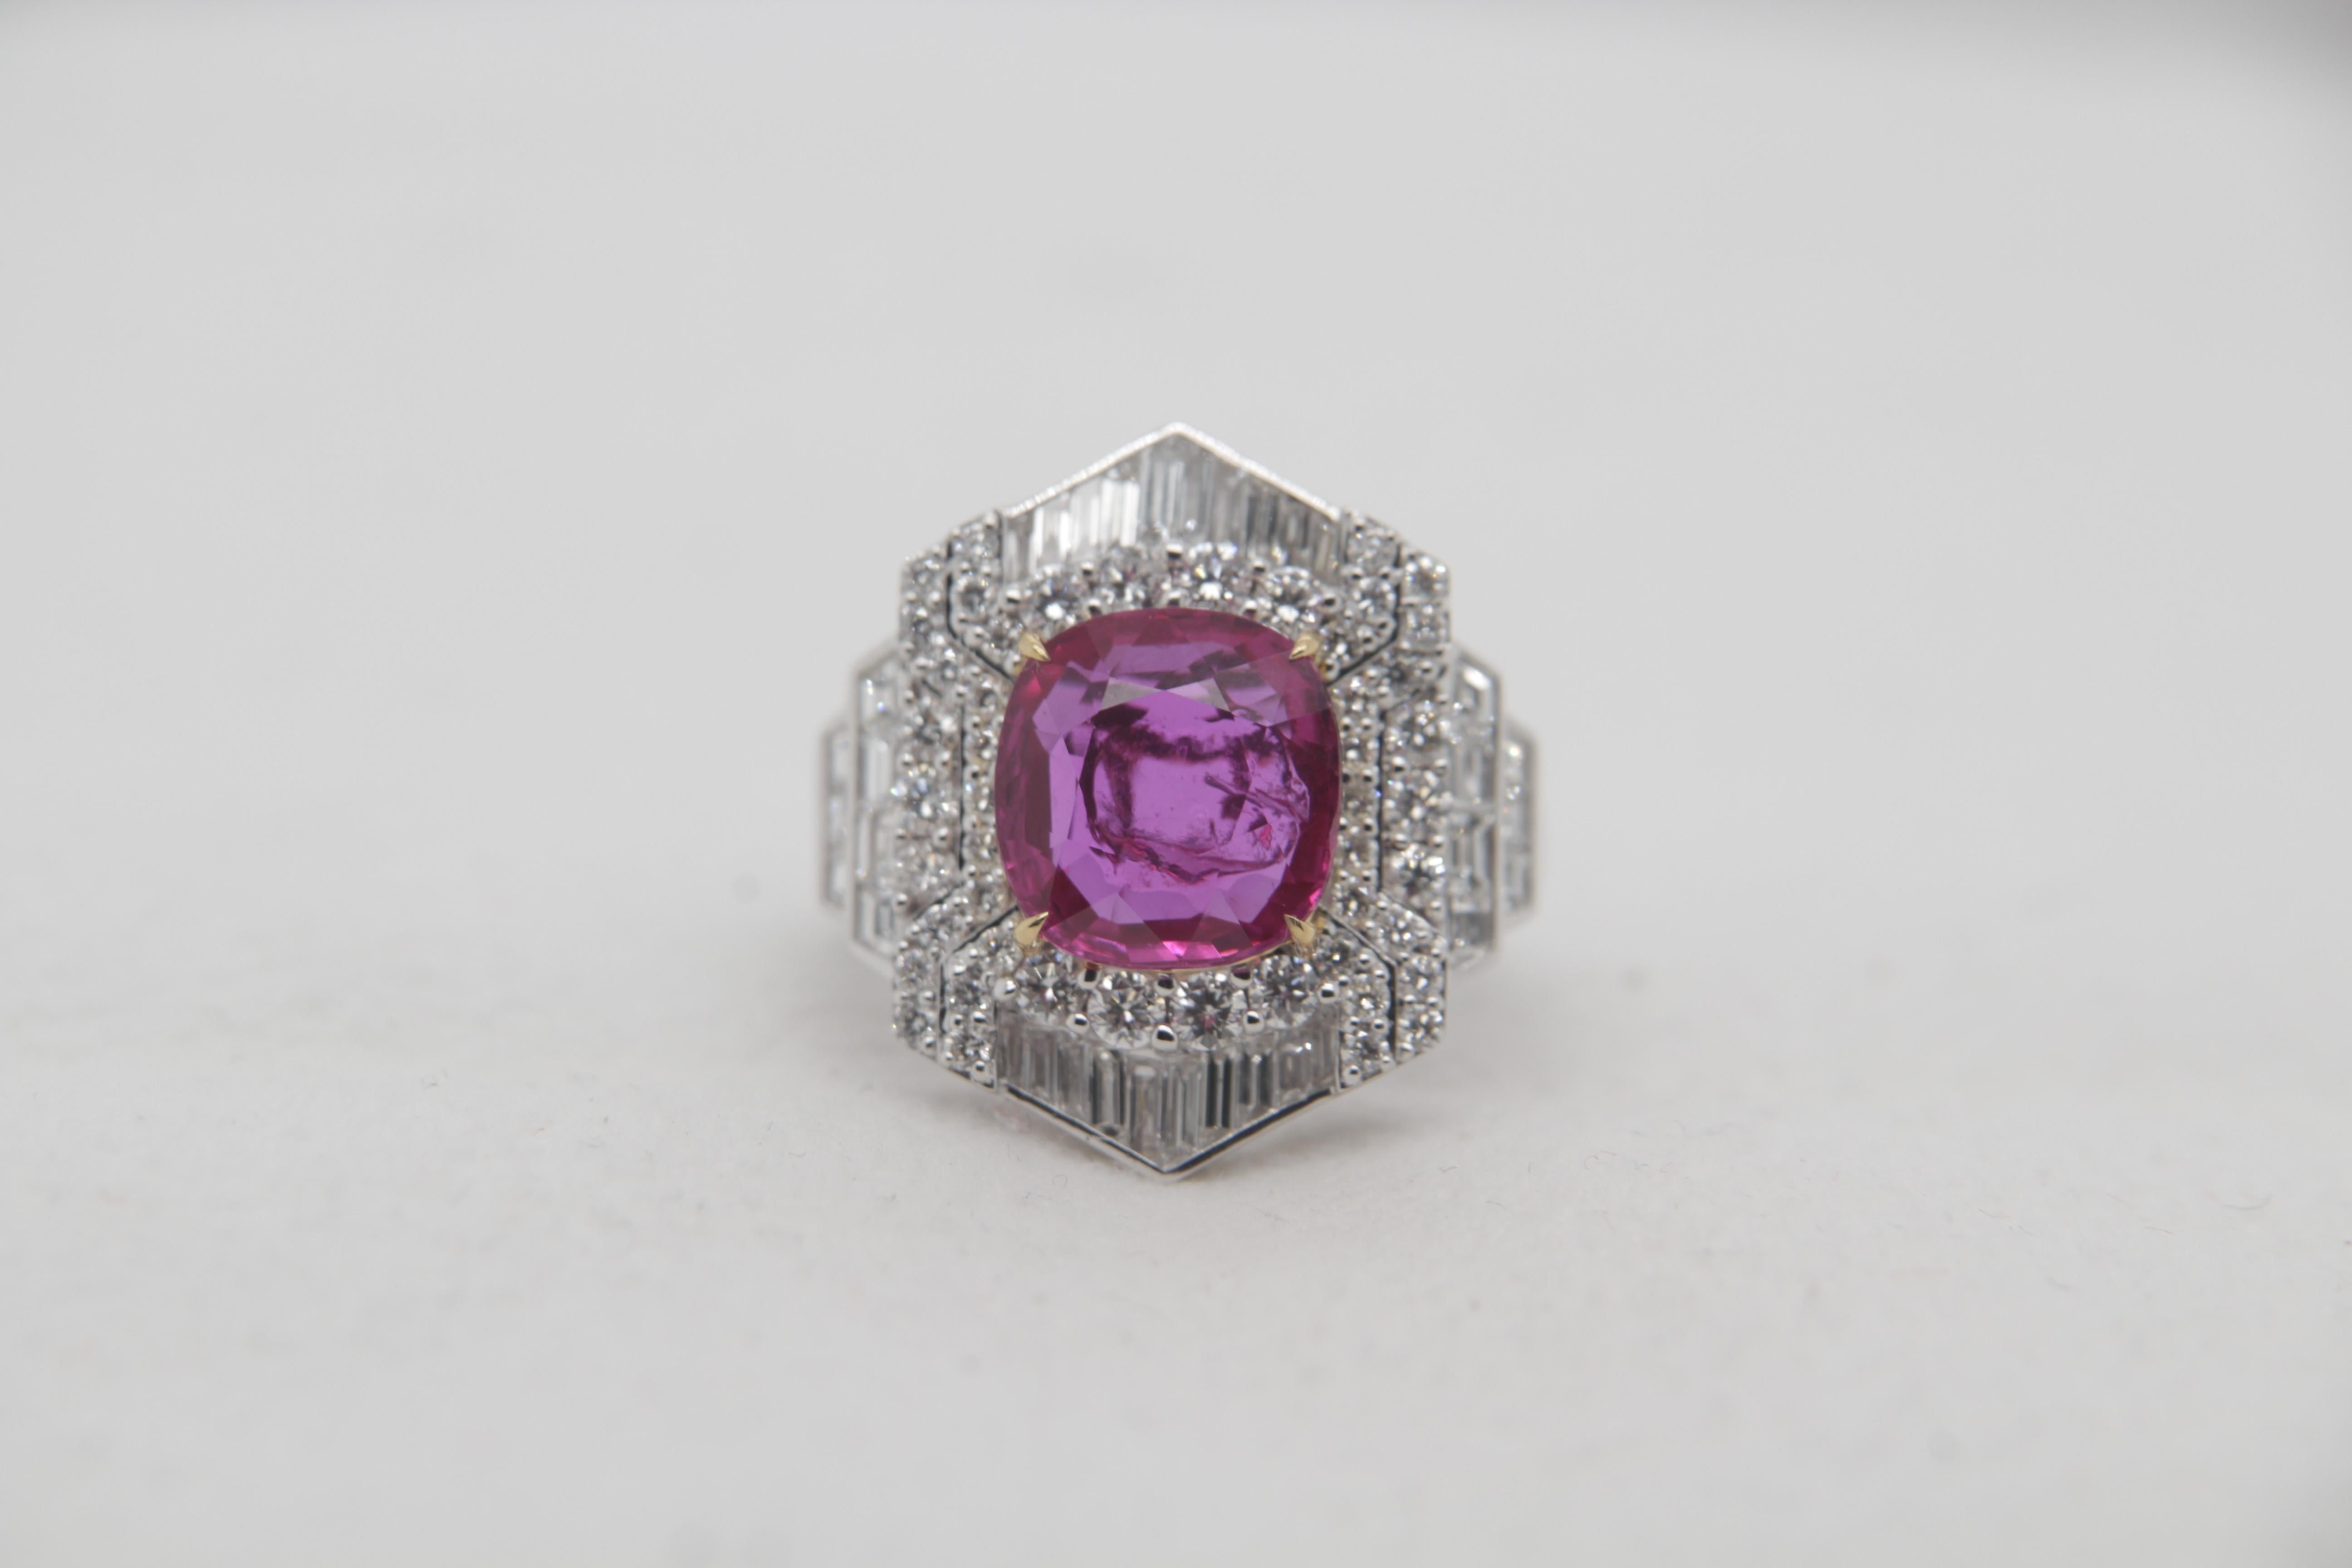 A brand new 4.23 carat Burmese ruby ring mounted with diamonds in 18 Karat gold. The ruby weighs 4.23 carat and is certified by Gem Research Swisslab (GRS) as natural, no heat, and 'Red'. The total diamond weight is 1.76 carat and the total rings